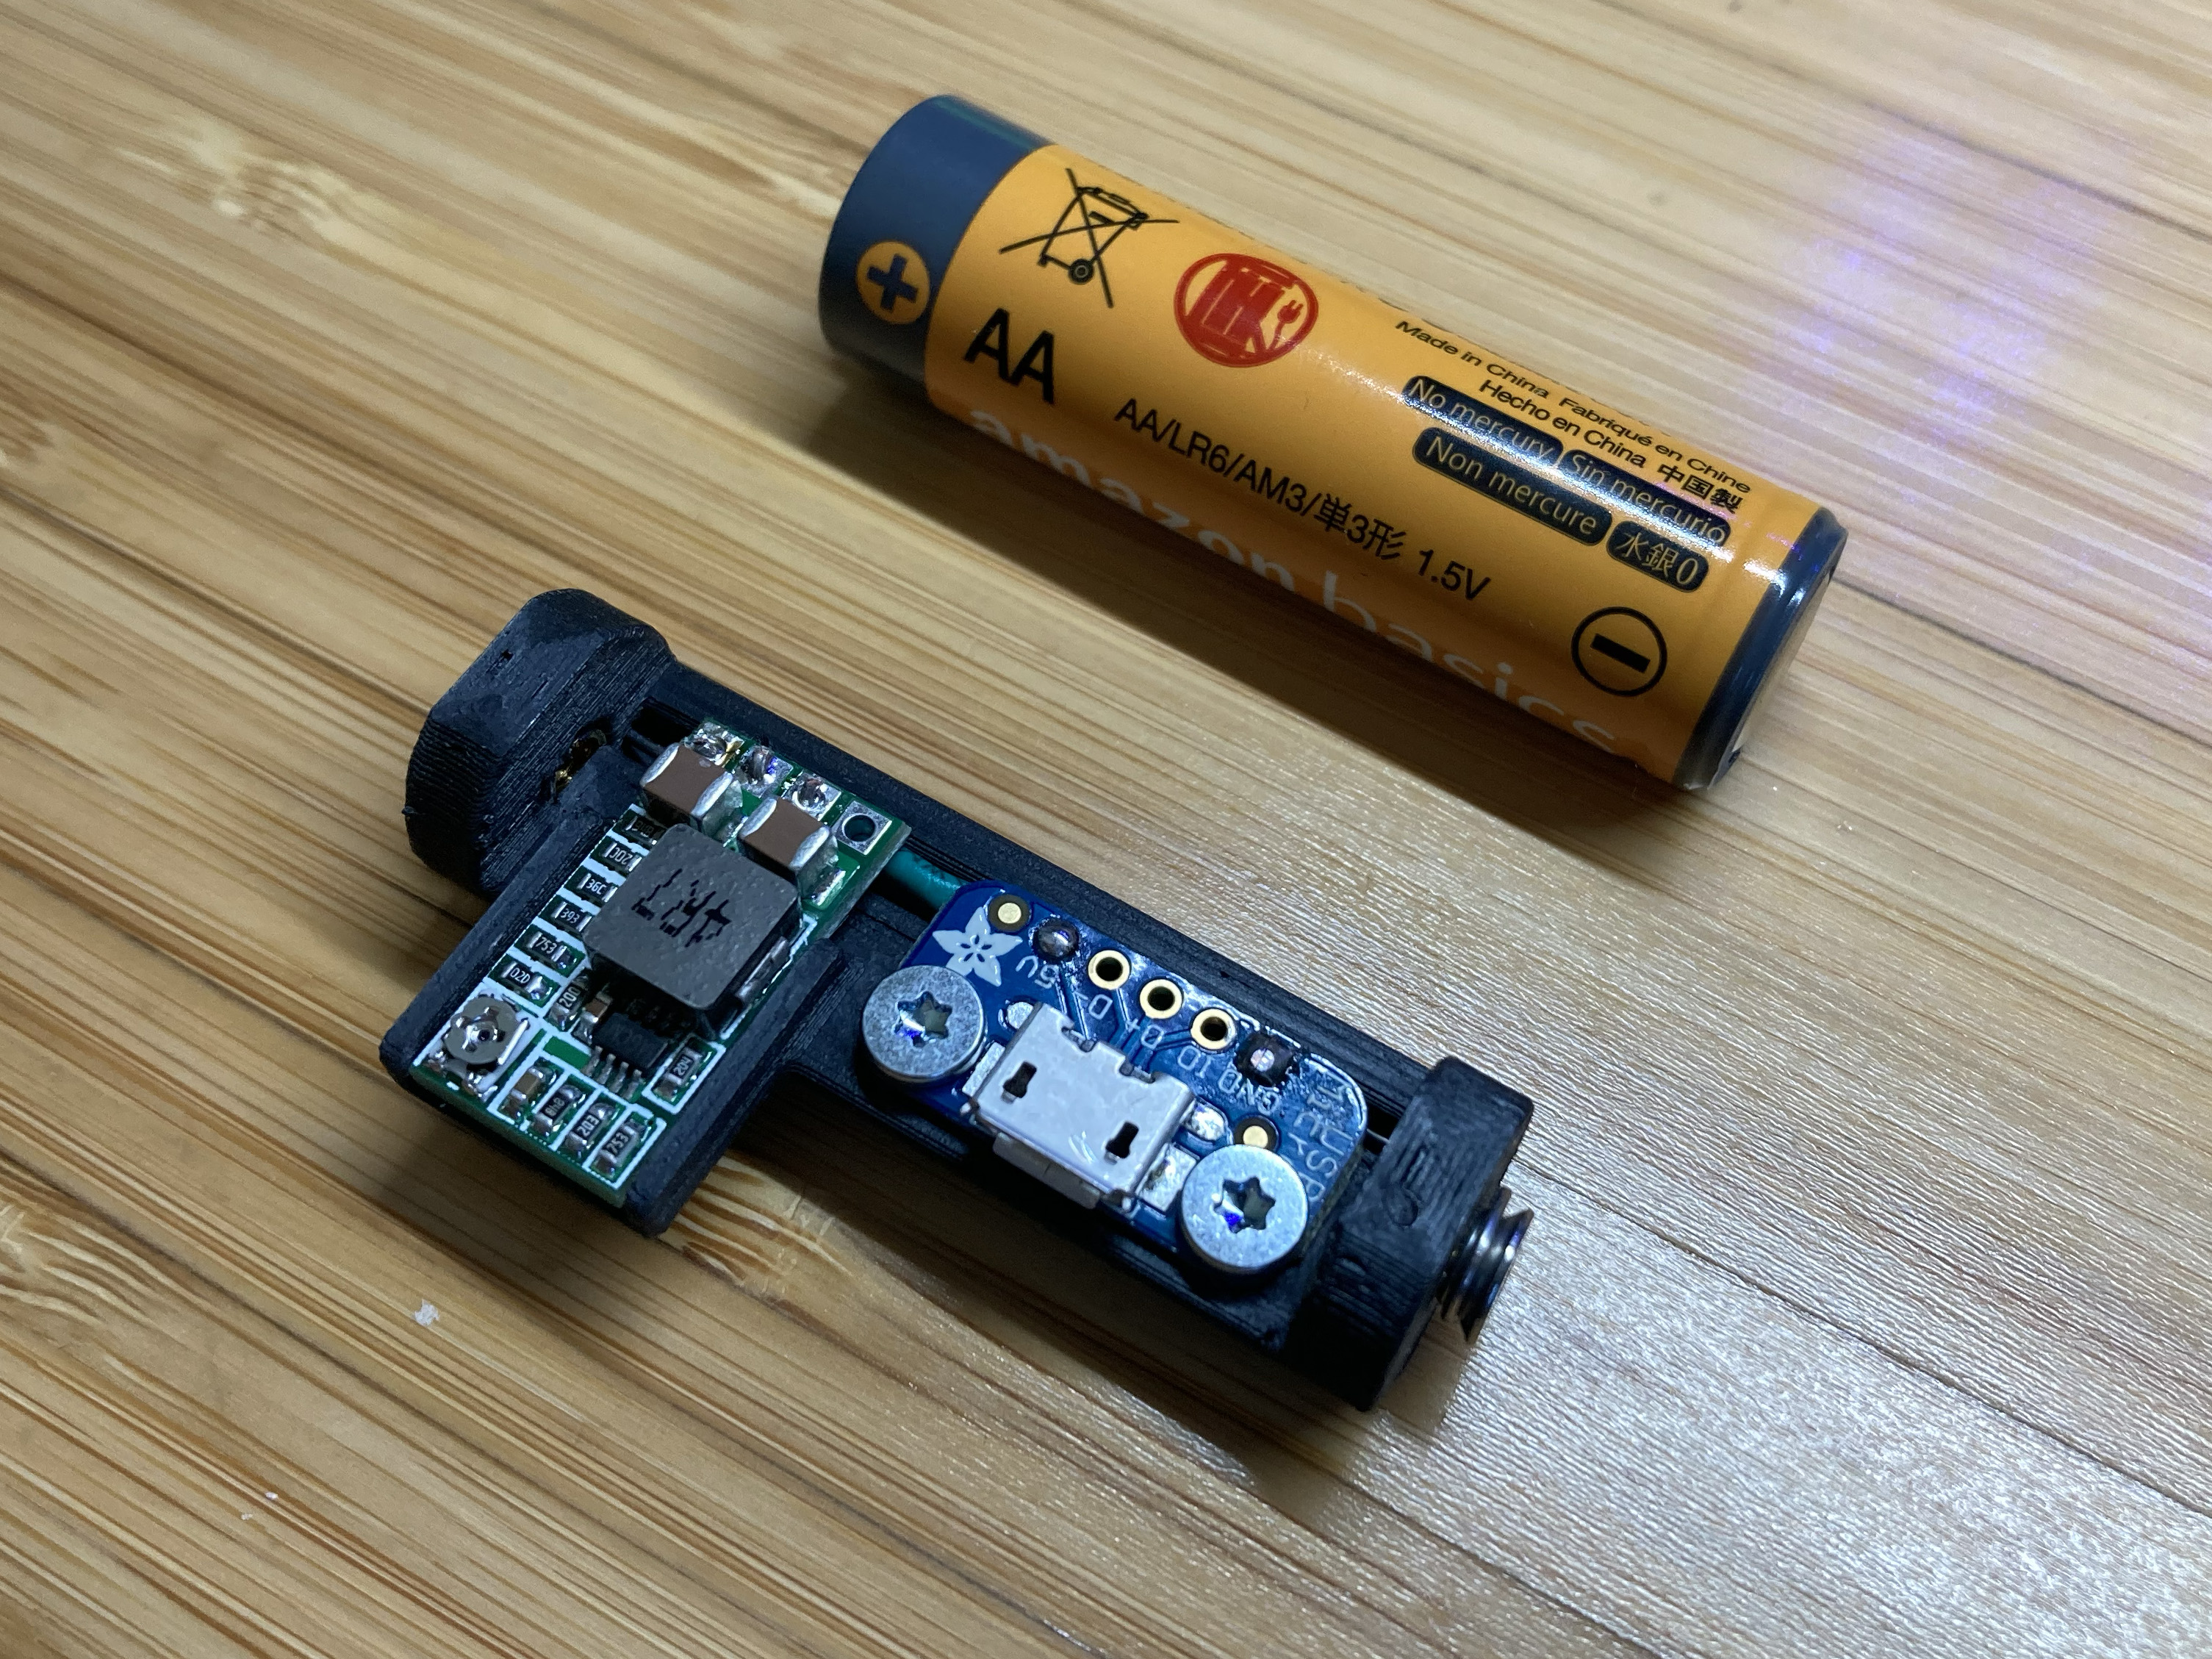 Photo of assembled shim next to a real AA battery for comparison